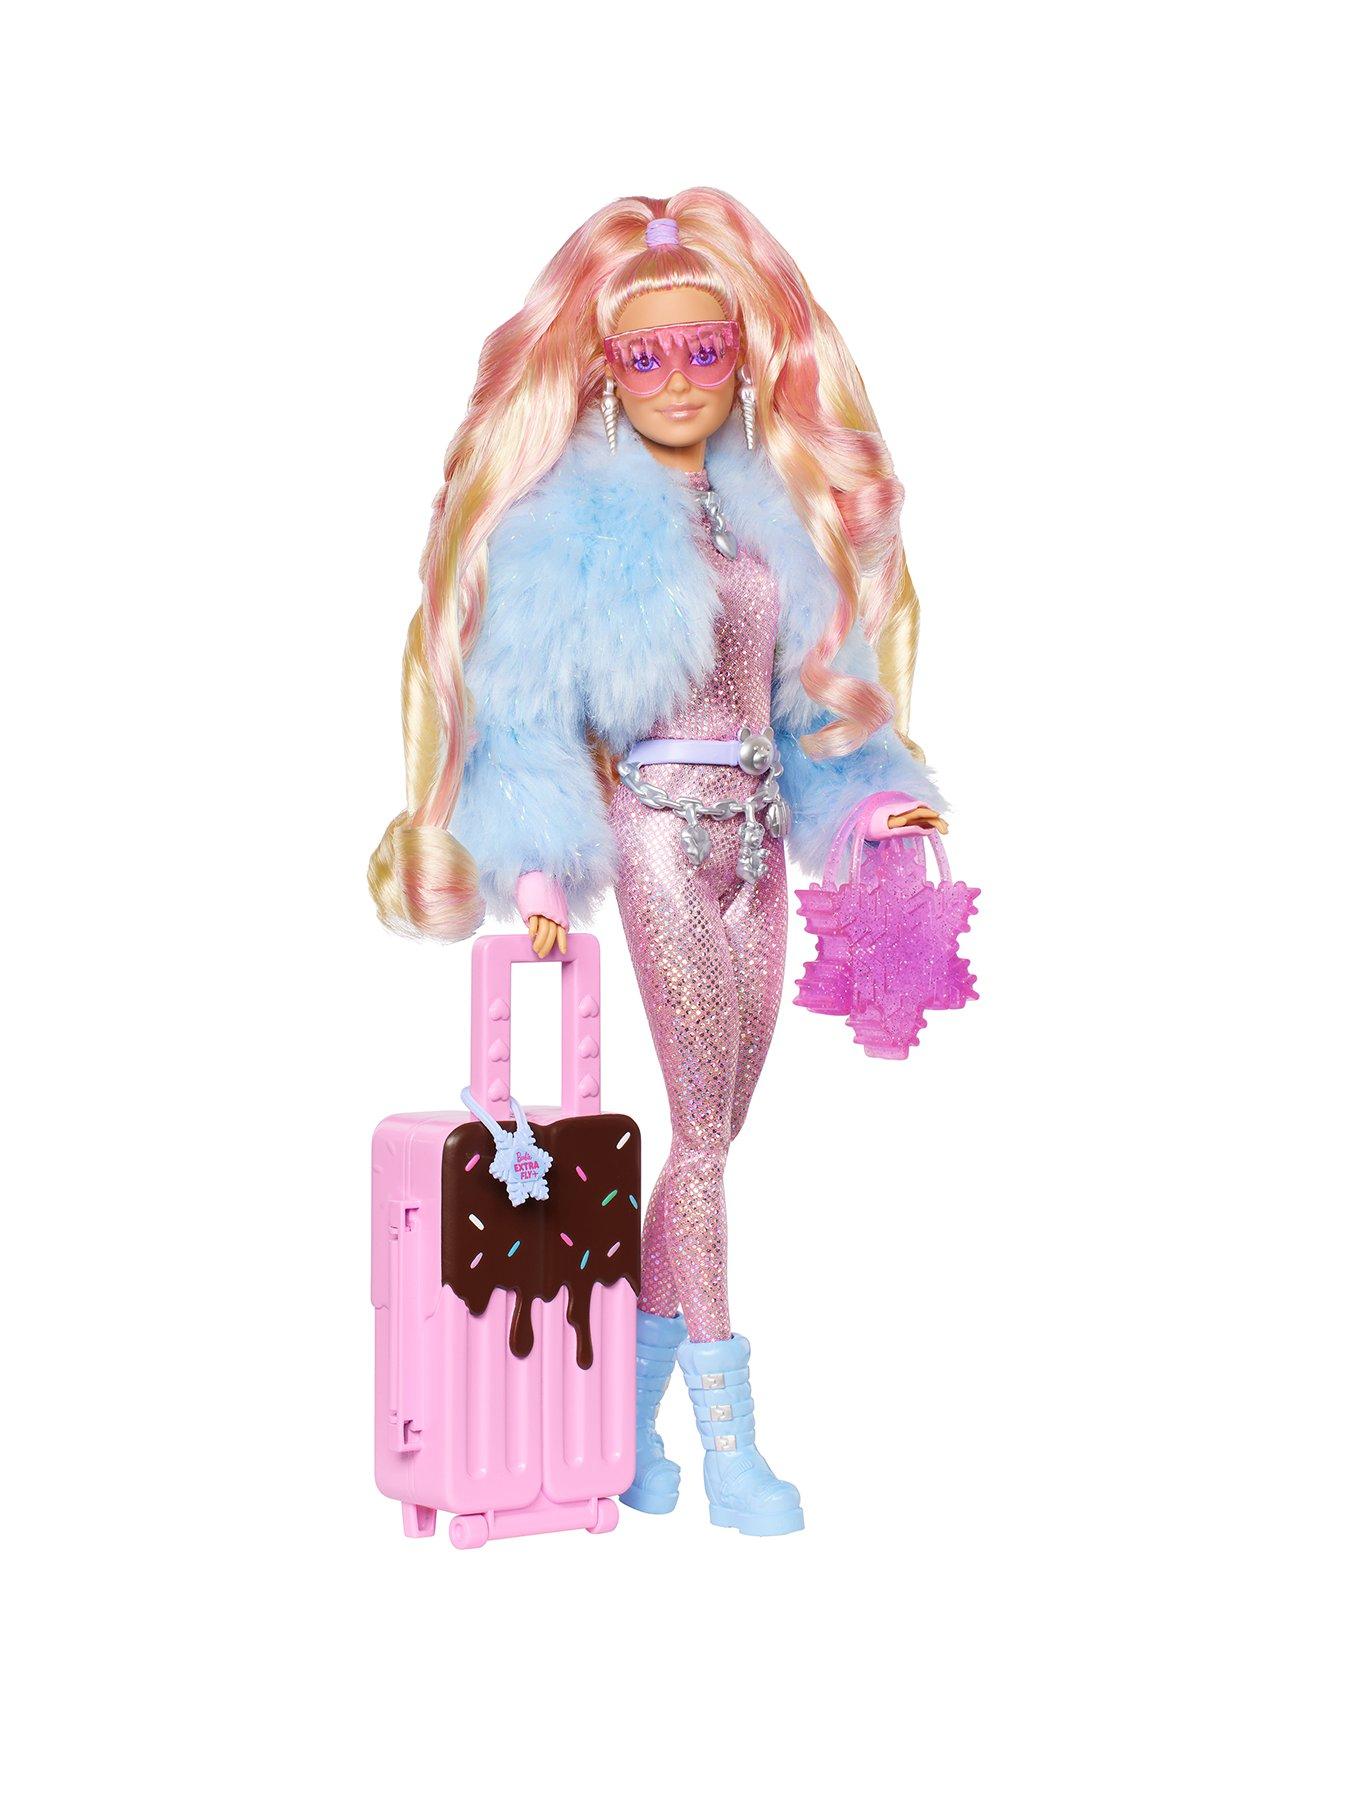 Barbie Dreamtopia Twinkle Lights Ballerina Doll with Blonde Hair & Light-Up  Feature Wearing Royal Headband & Pink Tutu